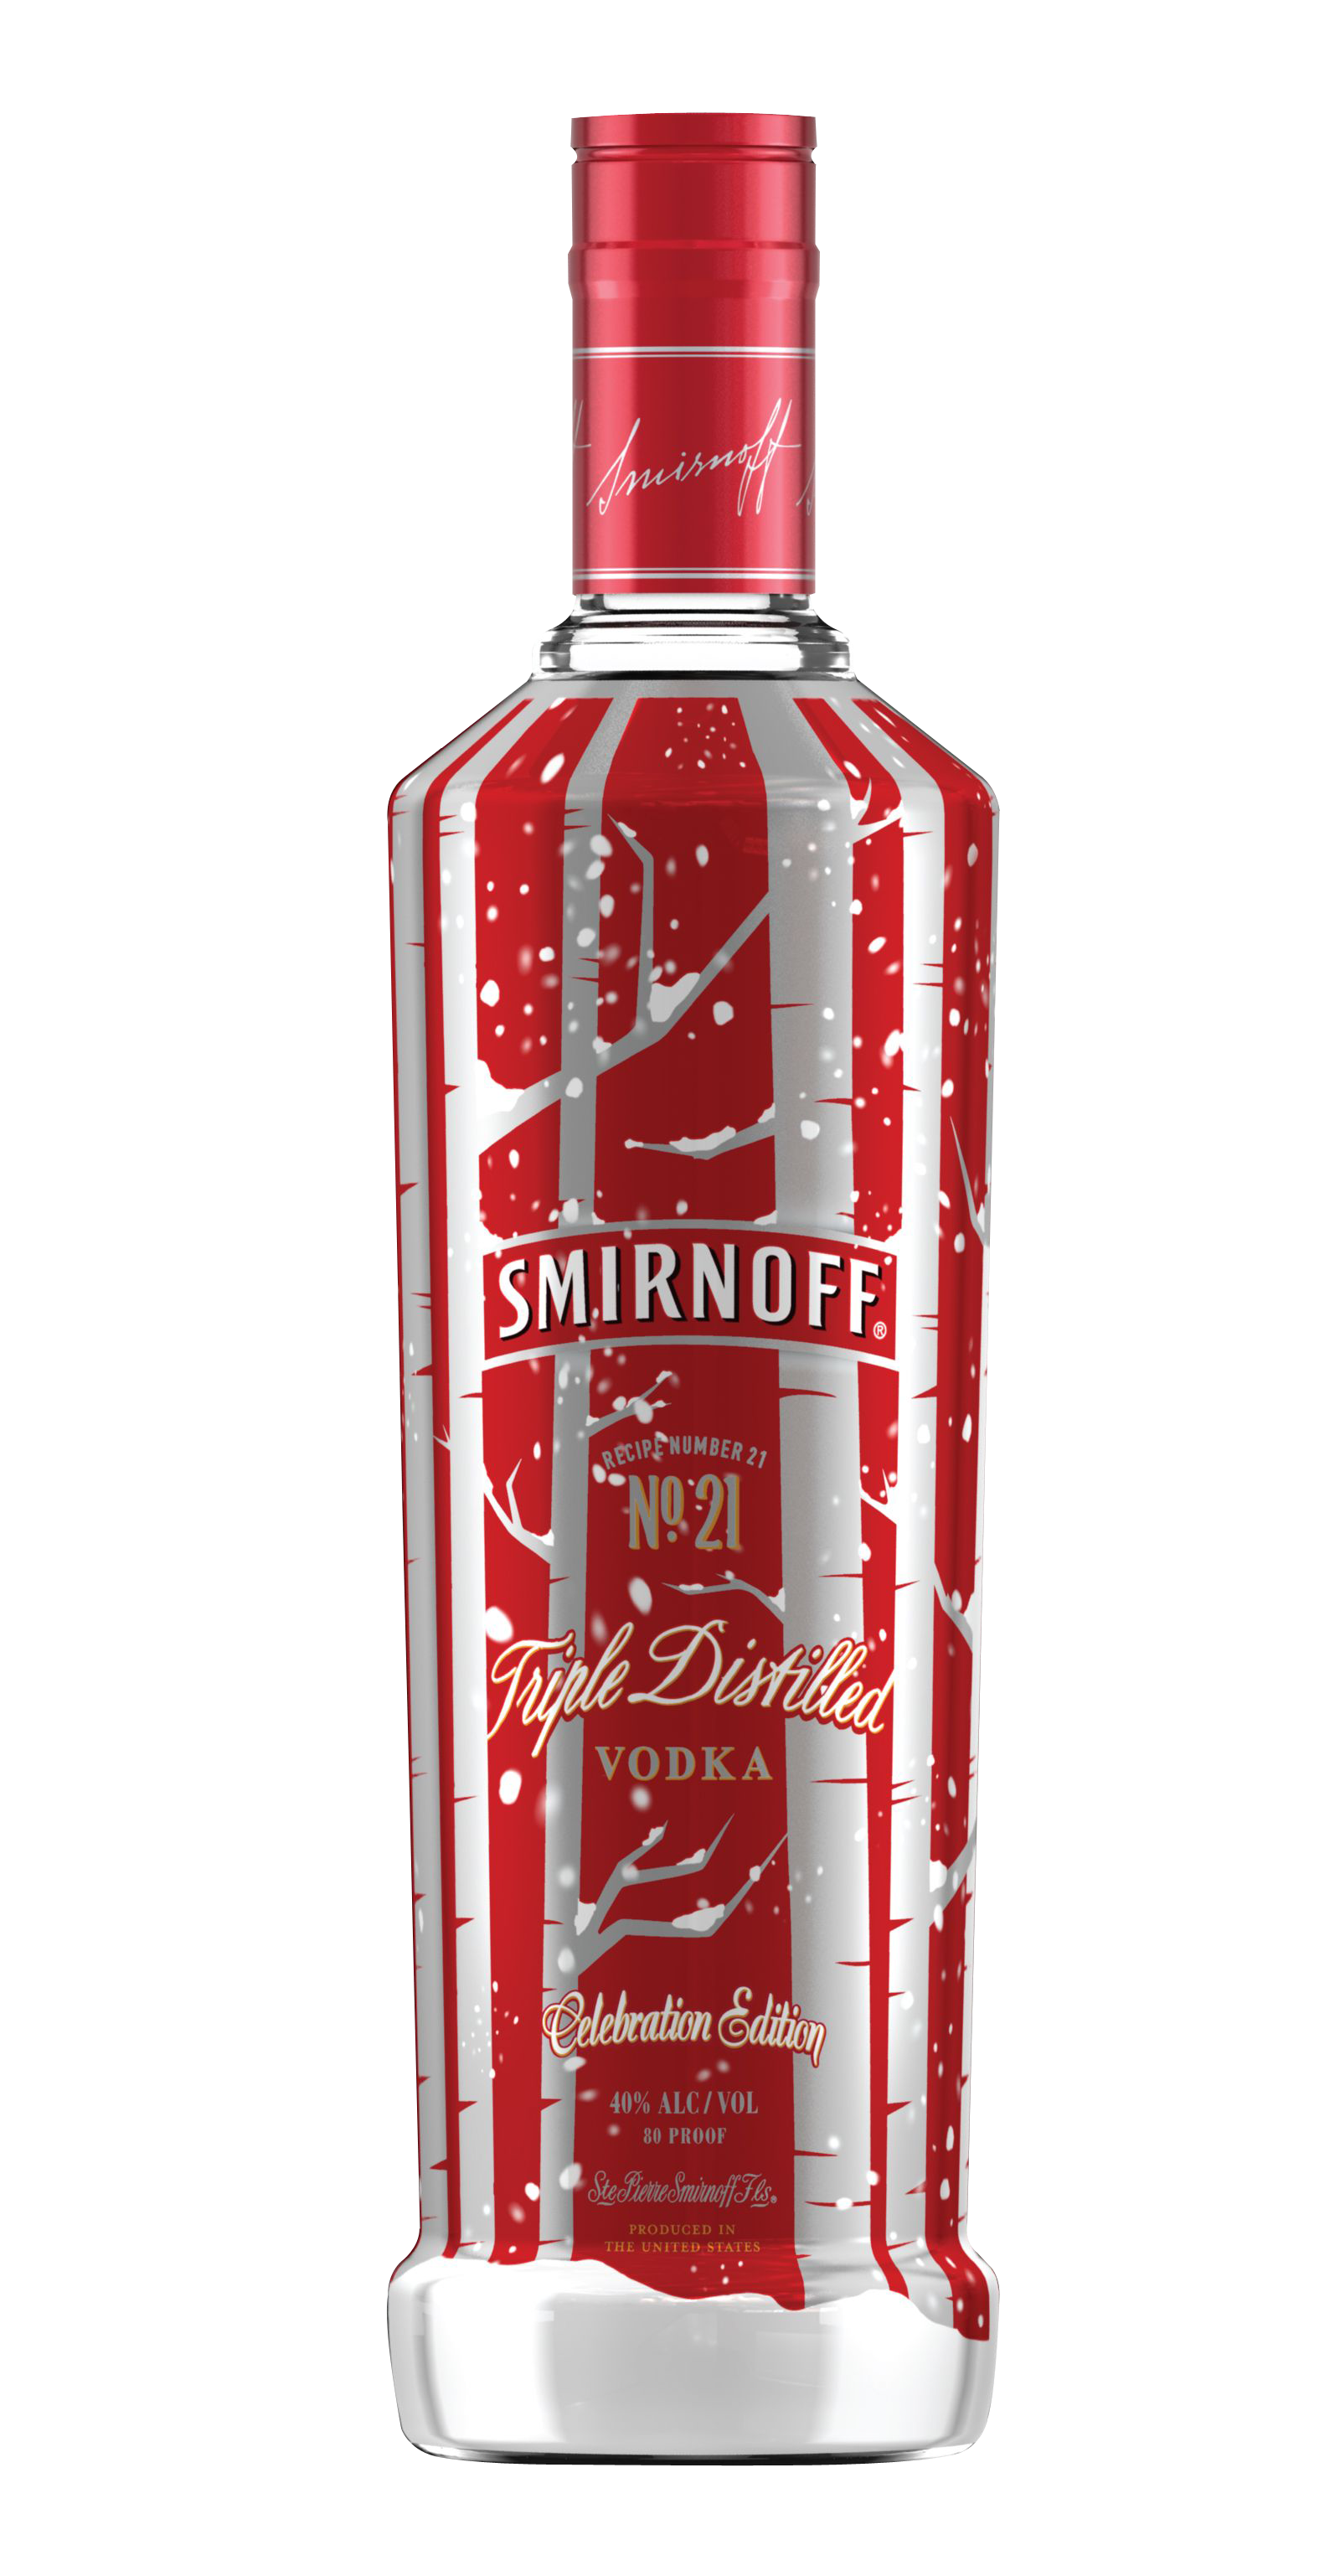 A Red And White Can Of Vodka